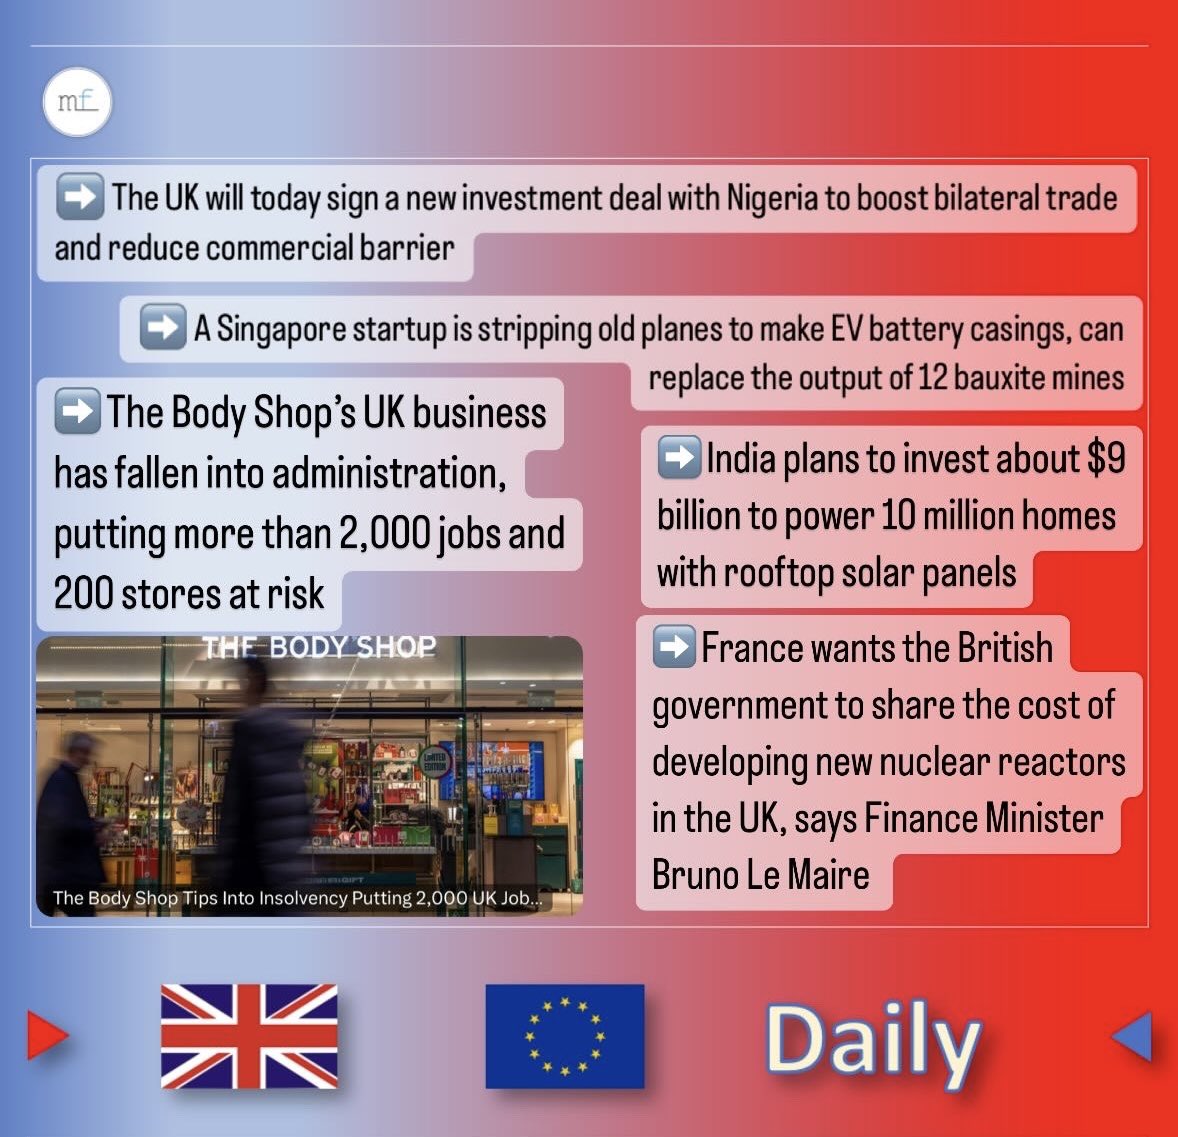 #Brexit daily #BrexitNews day 1️⃣1️⃣3️⃣9️⃣ #energytransition #trade #supplychain #business #logistics #Logistik #trade #export #import #customs #Finance #motionfinity #finances #financialservices #GDP #ukca #research #Science #space